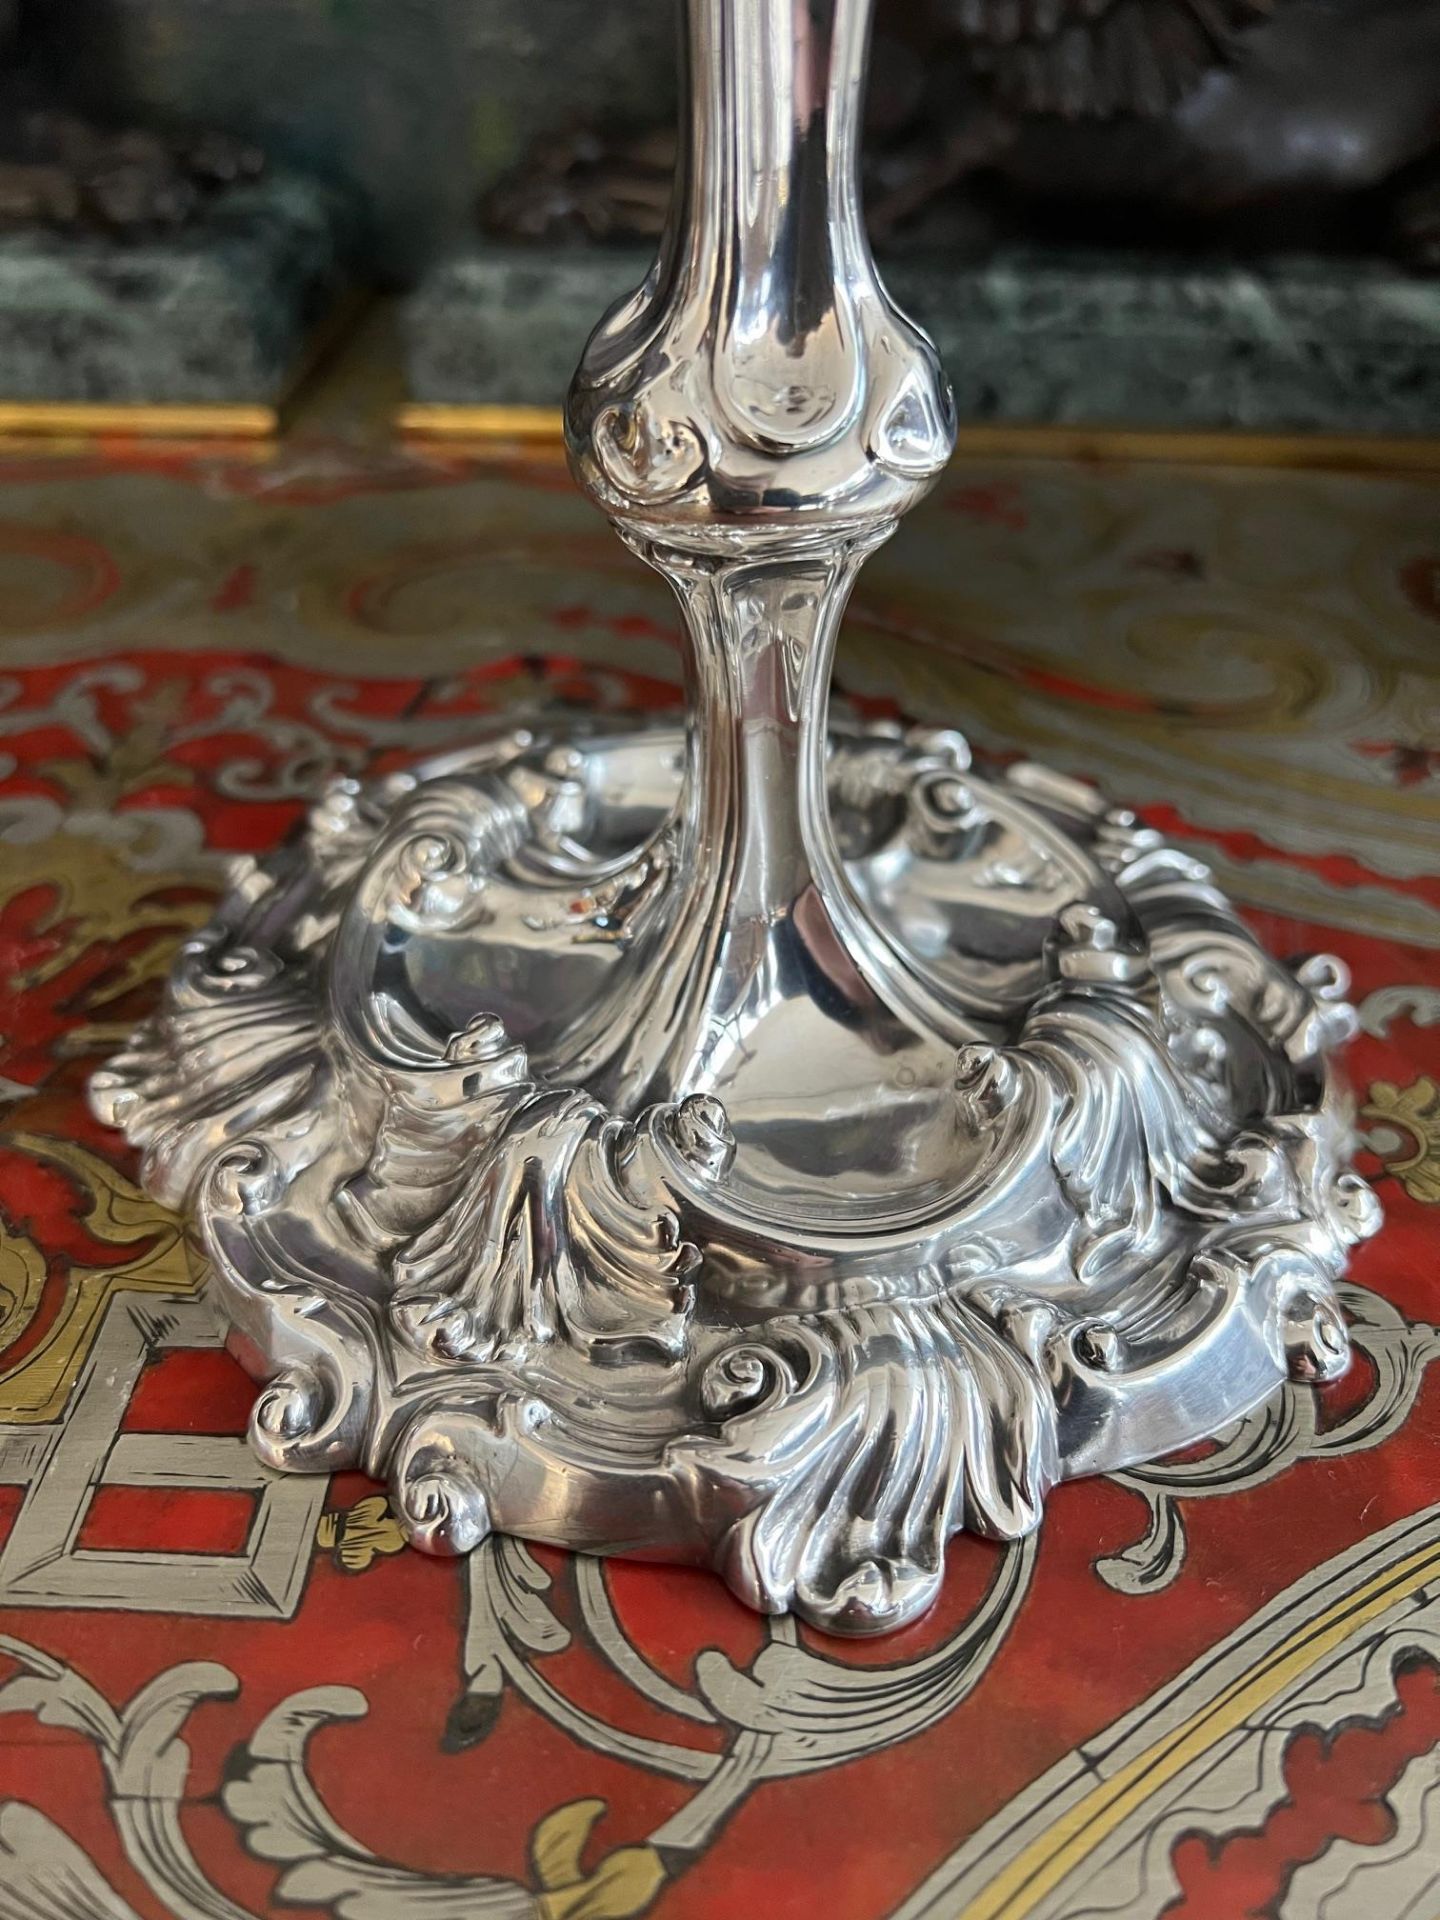 A FINE PAIR OF MID 18TH CENTURY STERLING SILVER CANDLESTICKS, LONDON, 1755, WILLIAM SKEEN - Image 8 of 8